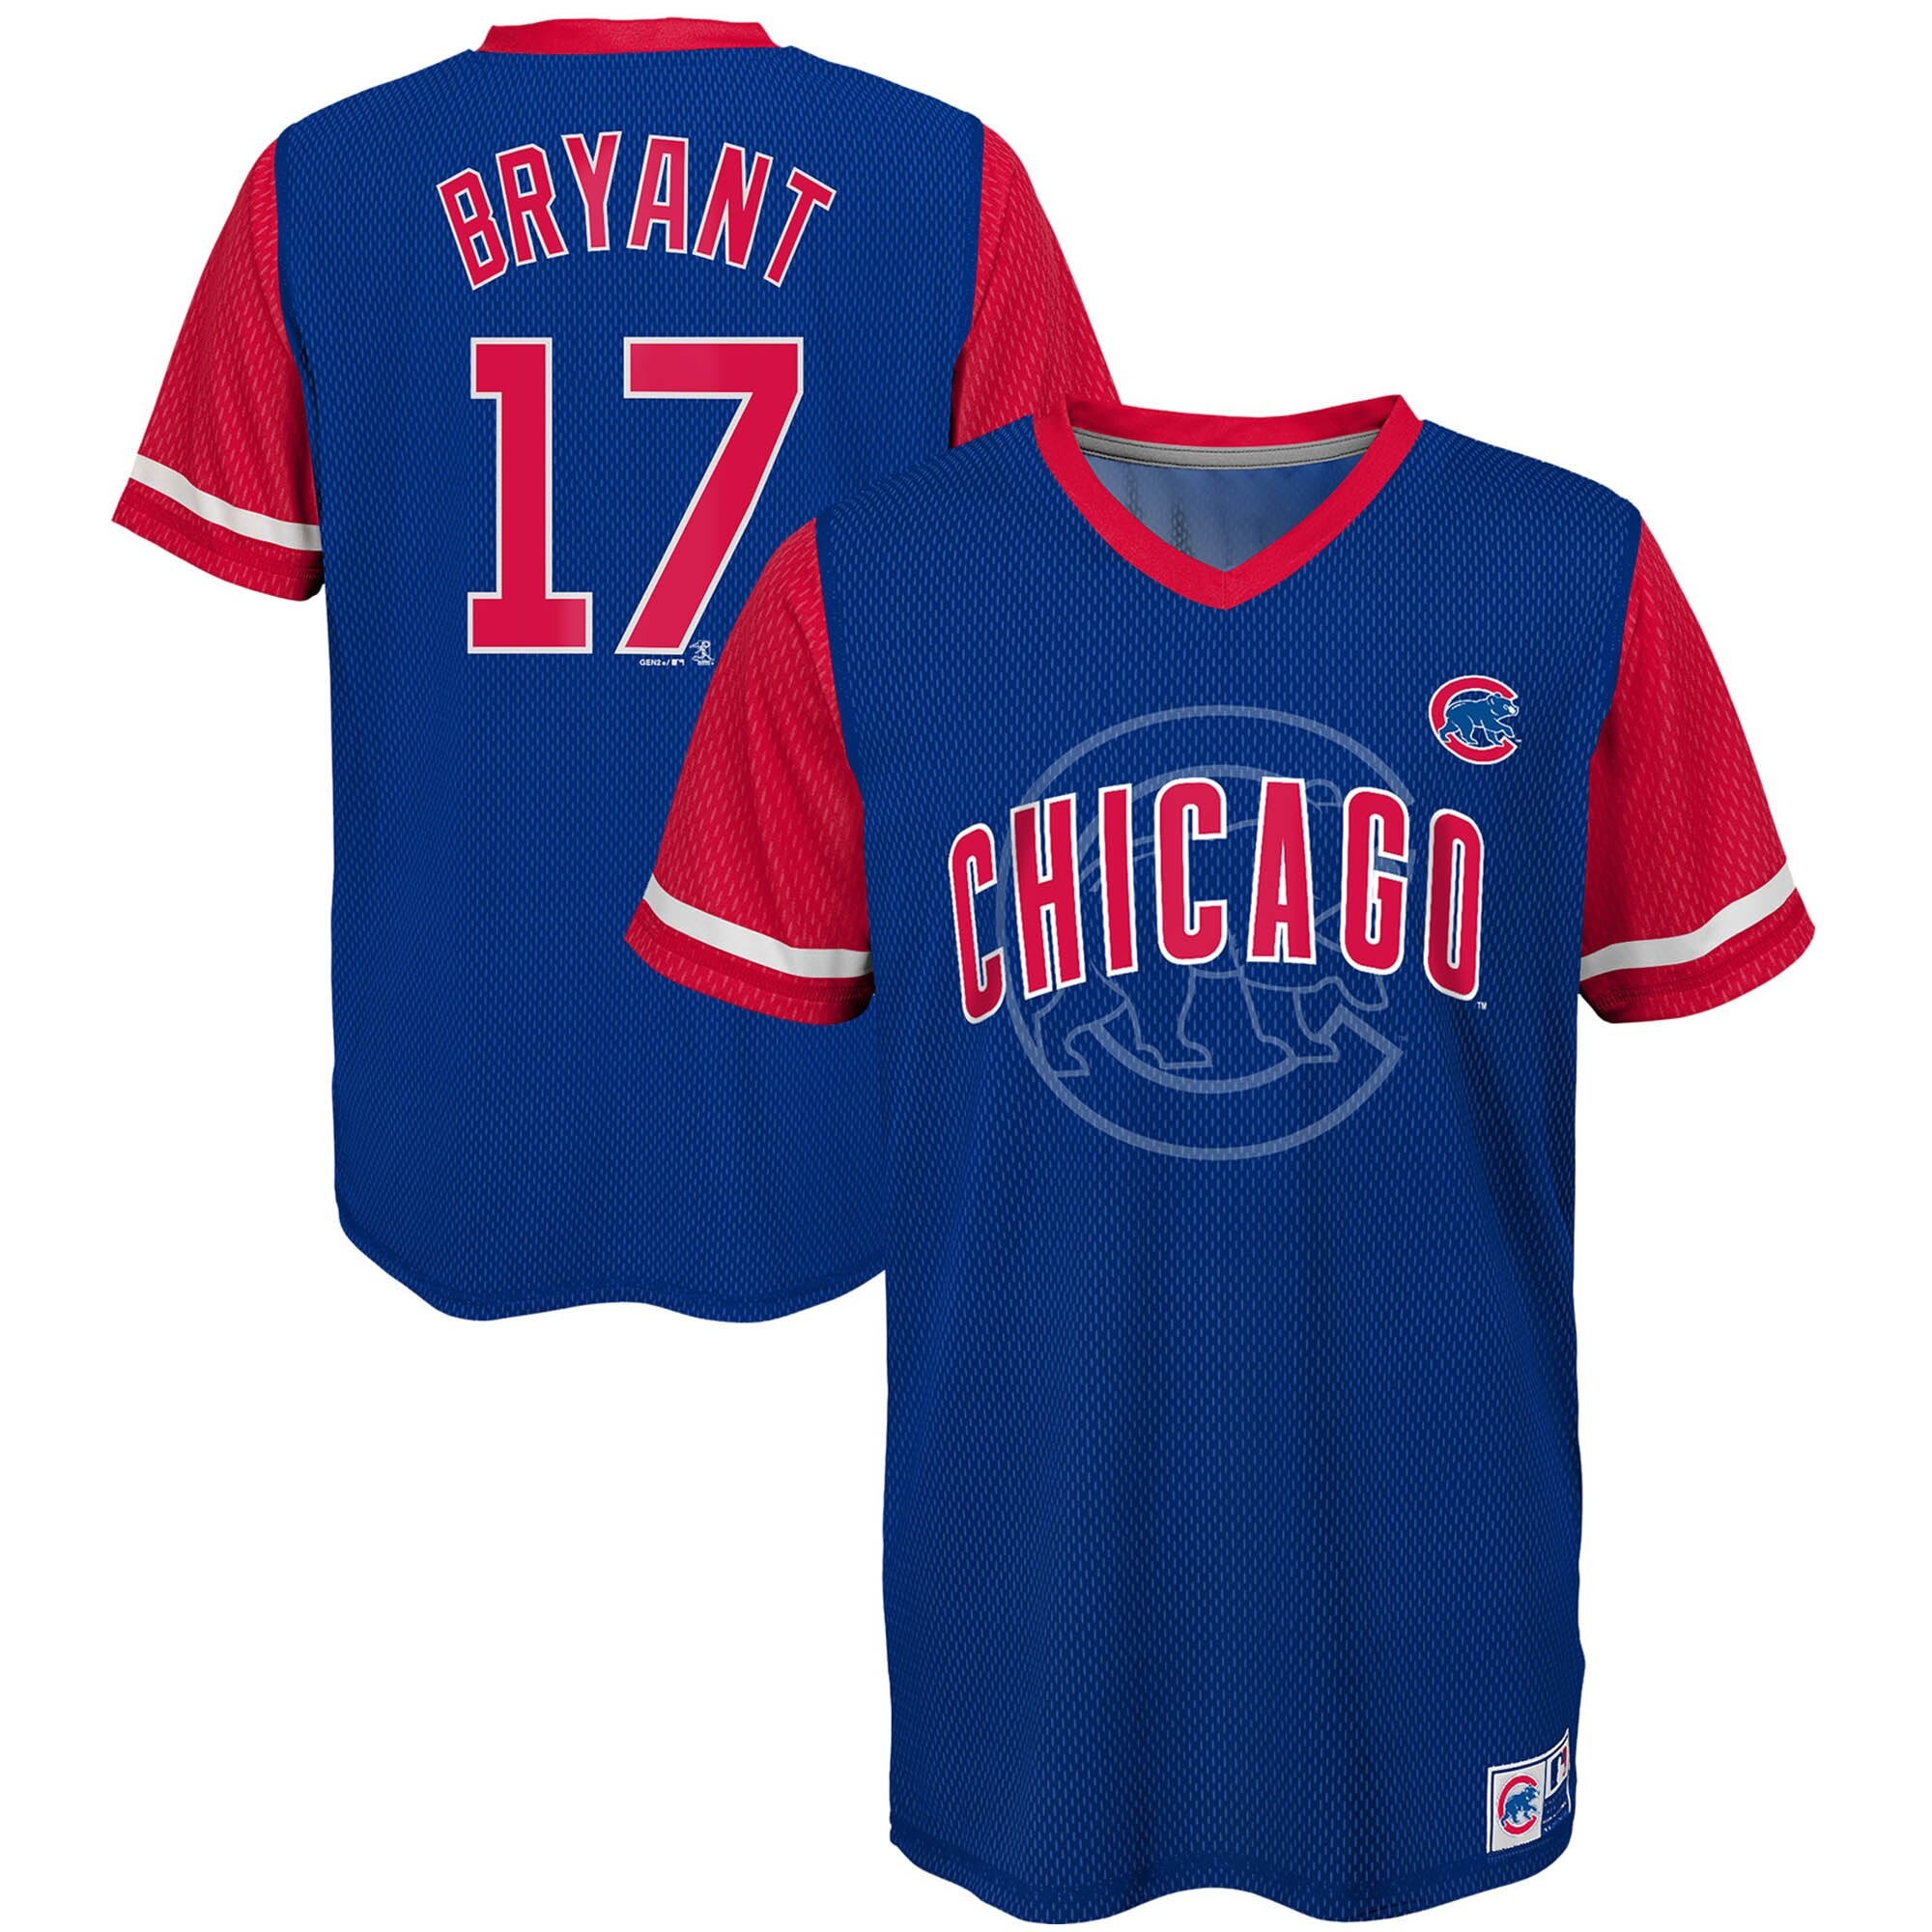 Chicago Cubs Youth Bryant Jersey T Shirt - Blue/Red